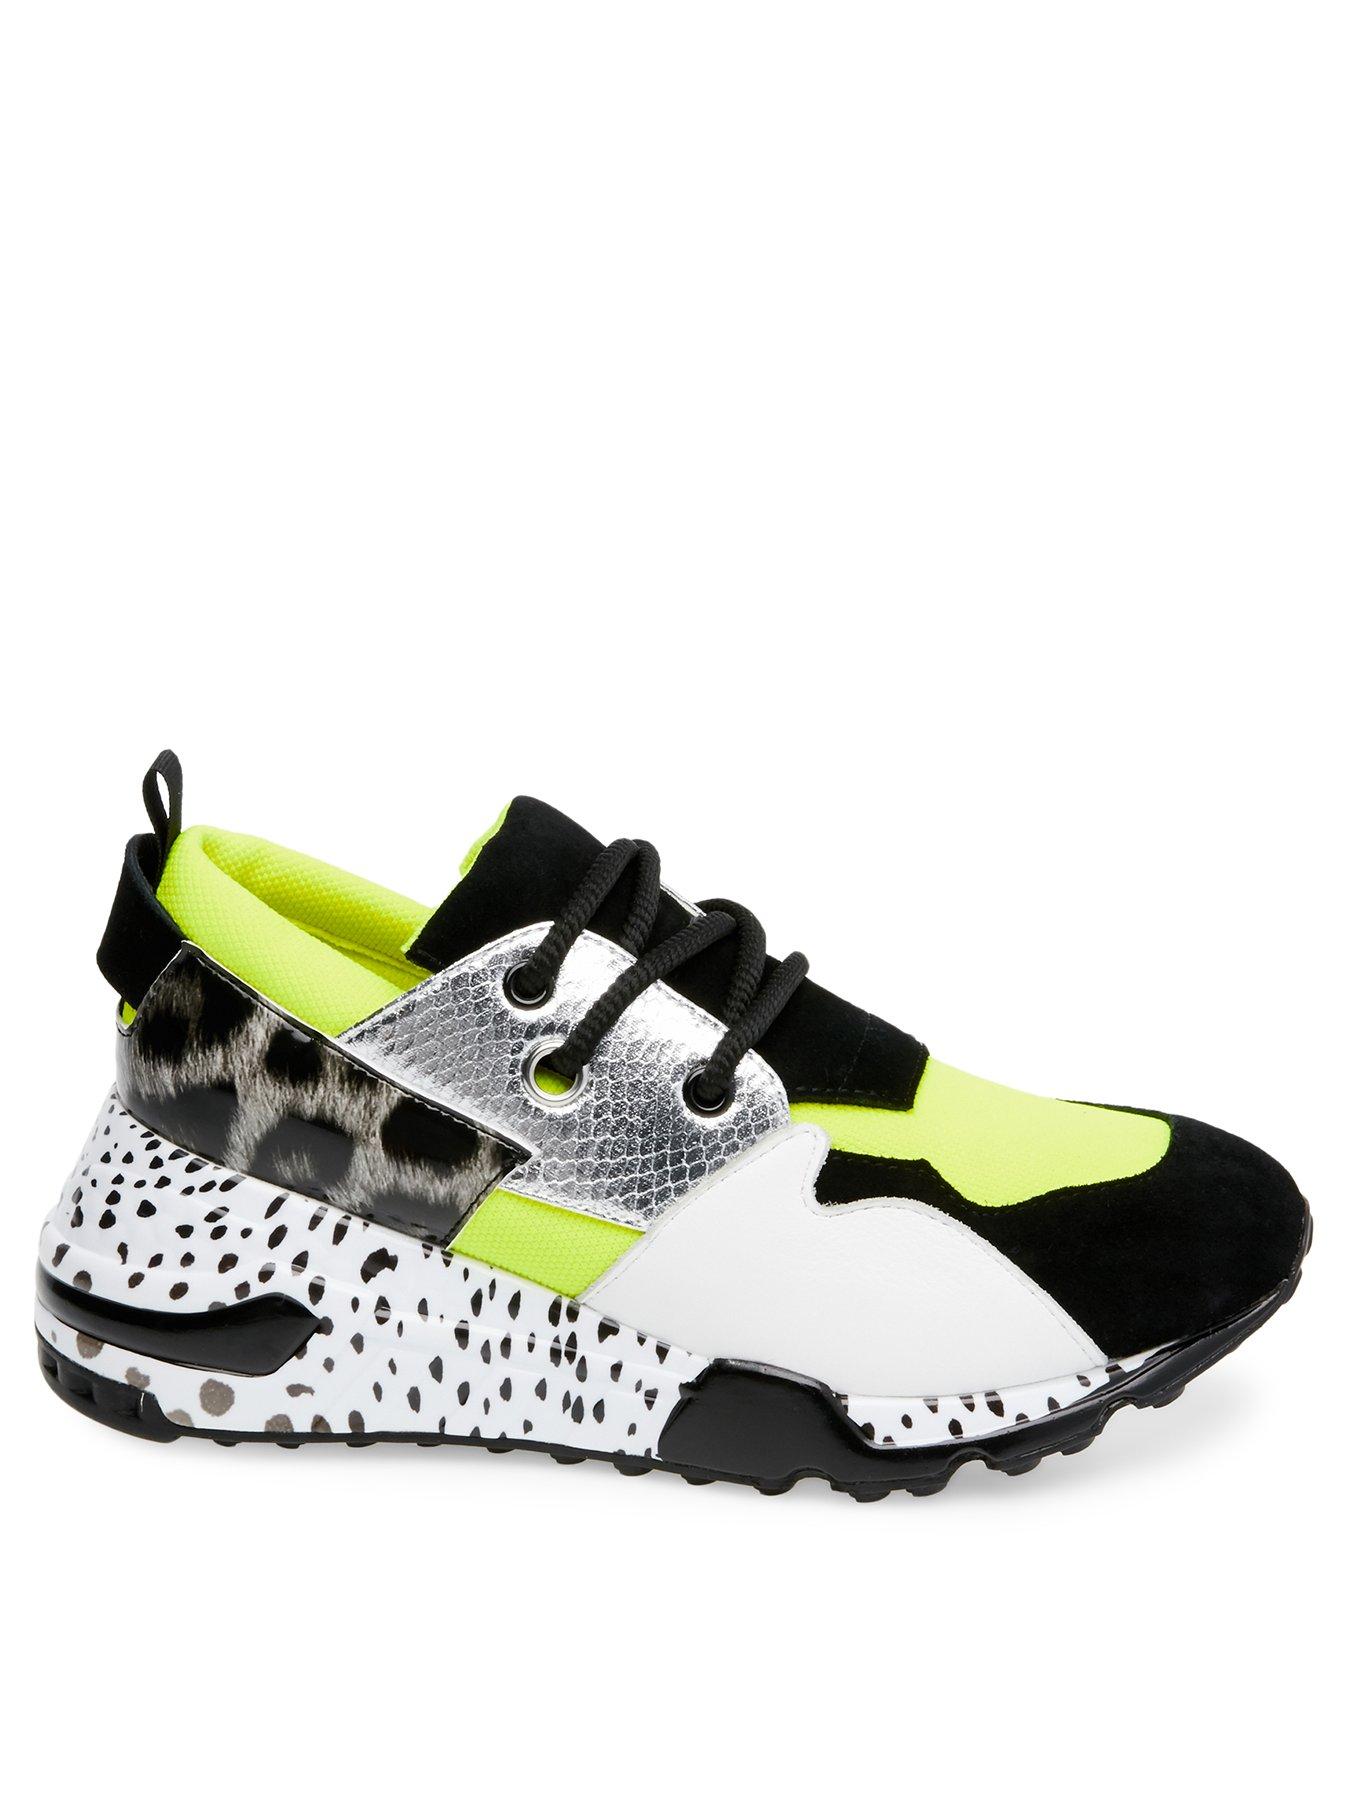 Steve Madden Cliff Trainers - Neon 